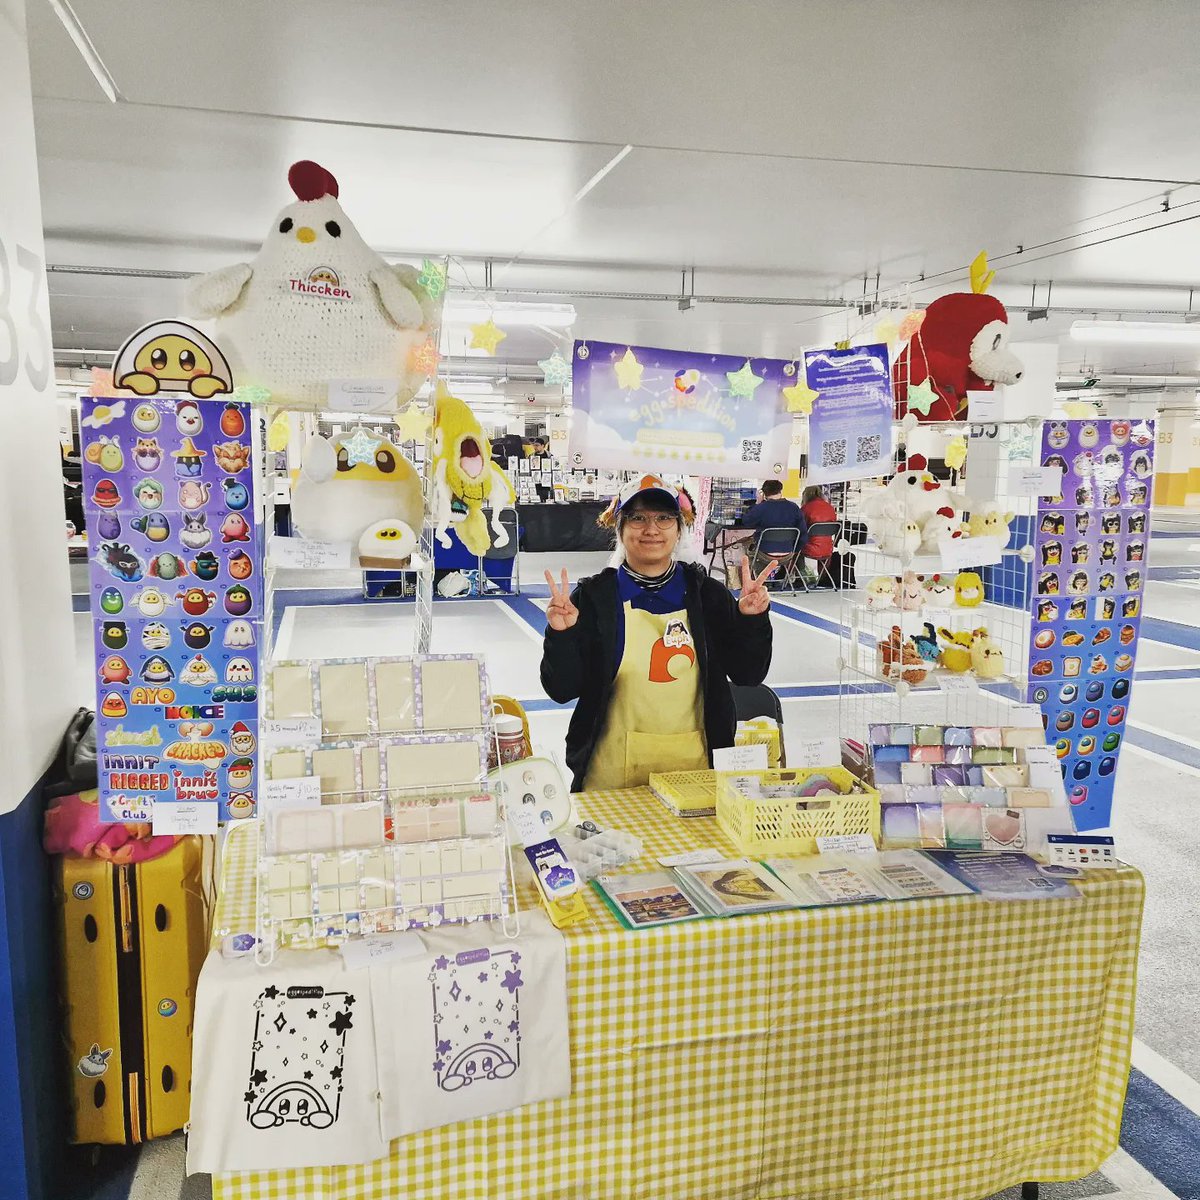 First table time! 

Day 1 - ✅️
Day 2 - incoming 

Come by @BGCPComicCon Edinburgh Comic Con at St James Quarter for some fun! We'll be here from 10am - 5pm Sunday! 🥰

#SmallBusiness #crafts